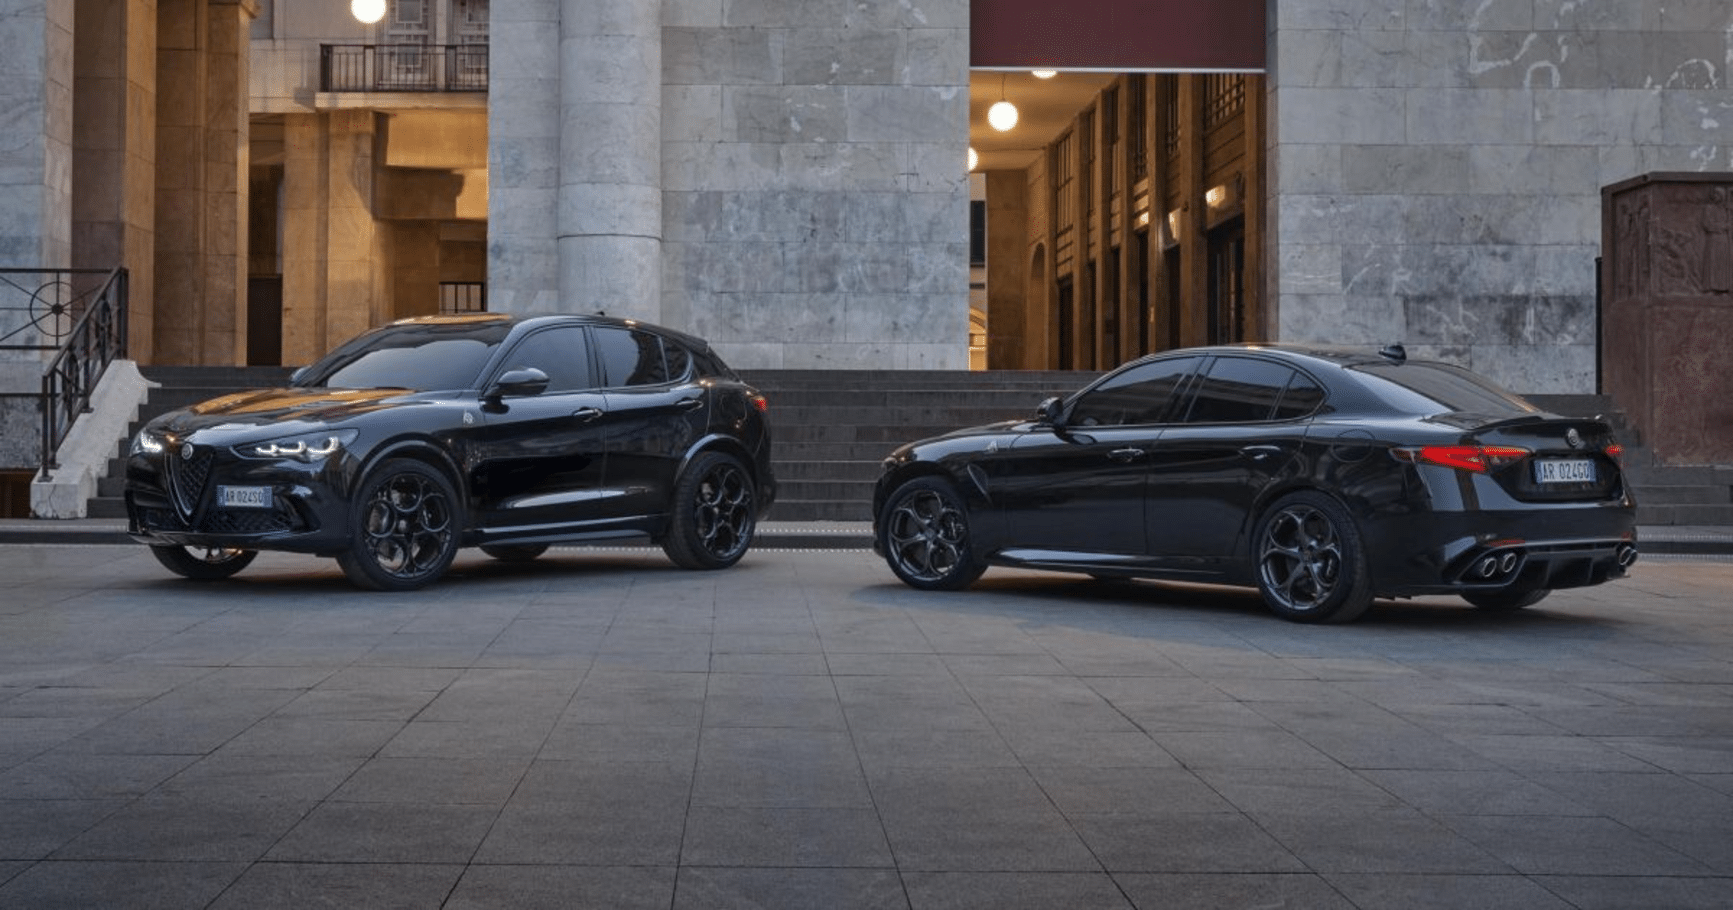 Alfa Romeo bids farewell to petrol power with limited-edition Giulia and Stelvio Super Sport models